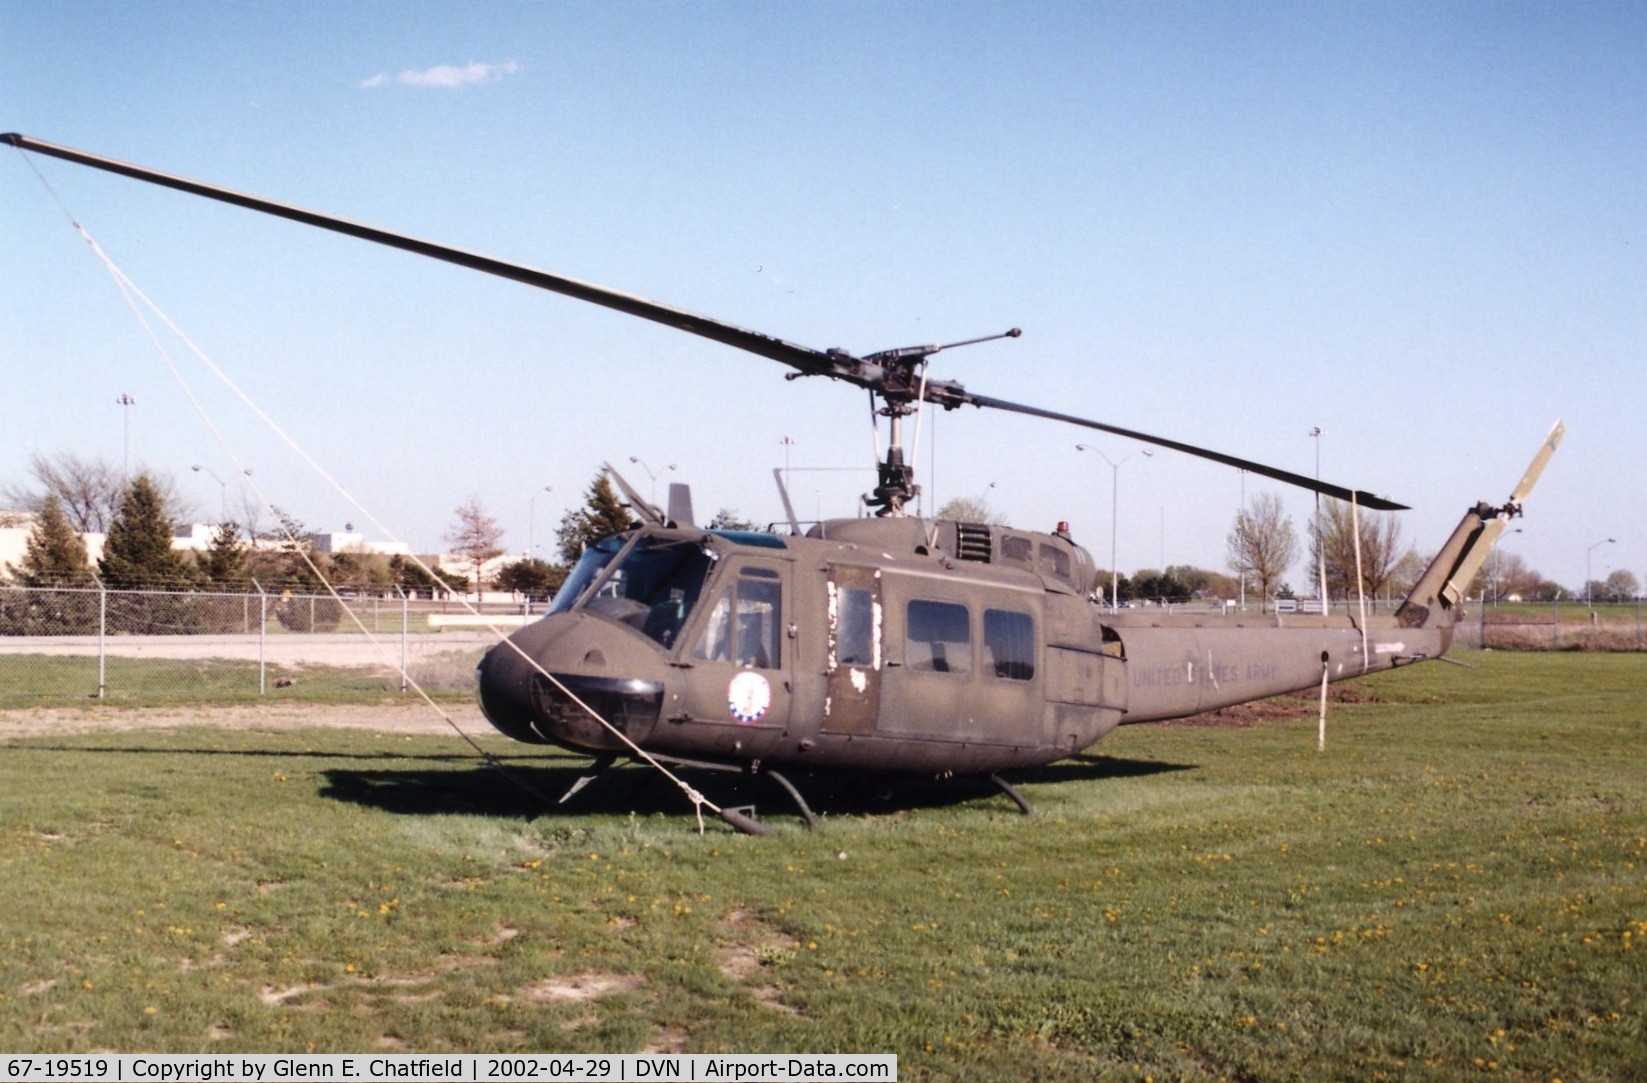 67-19519, 1967 Bell UH-1H Iroquois C/N 10125, UH-1H derelict at the Army National Guard